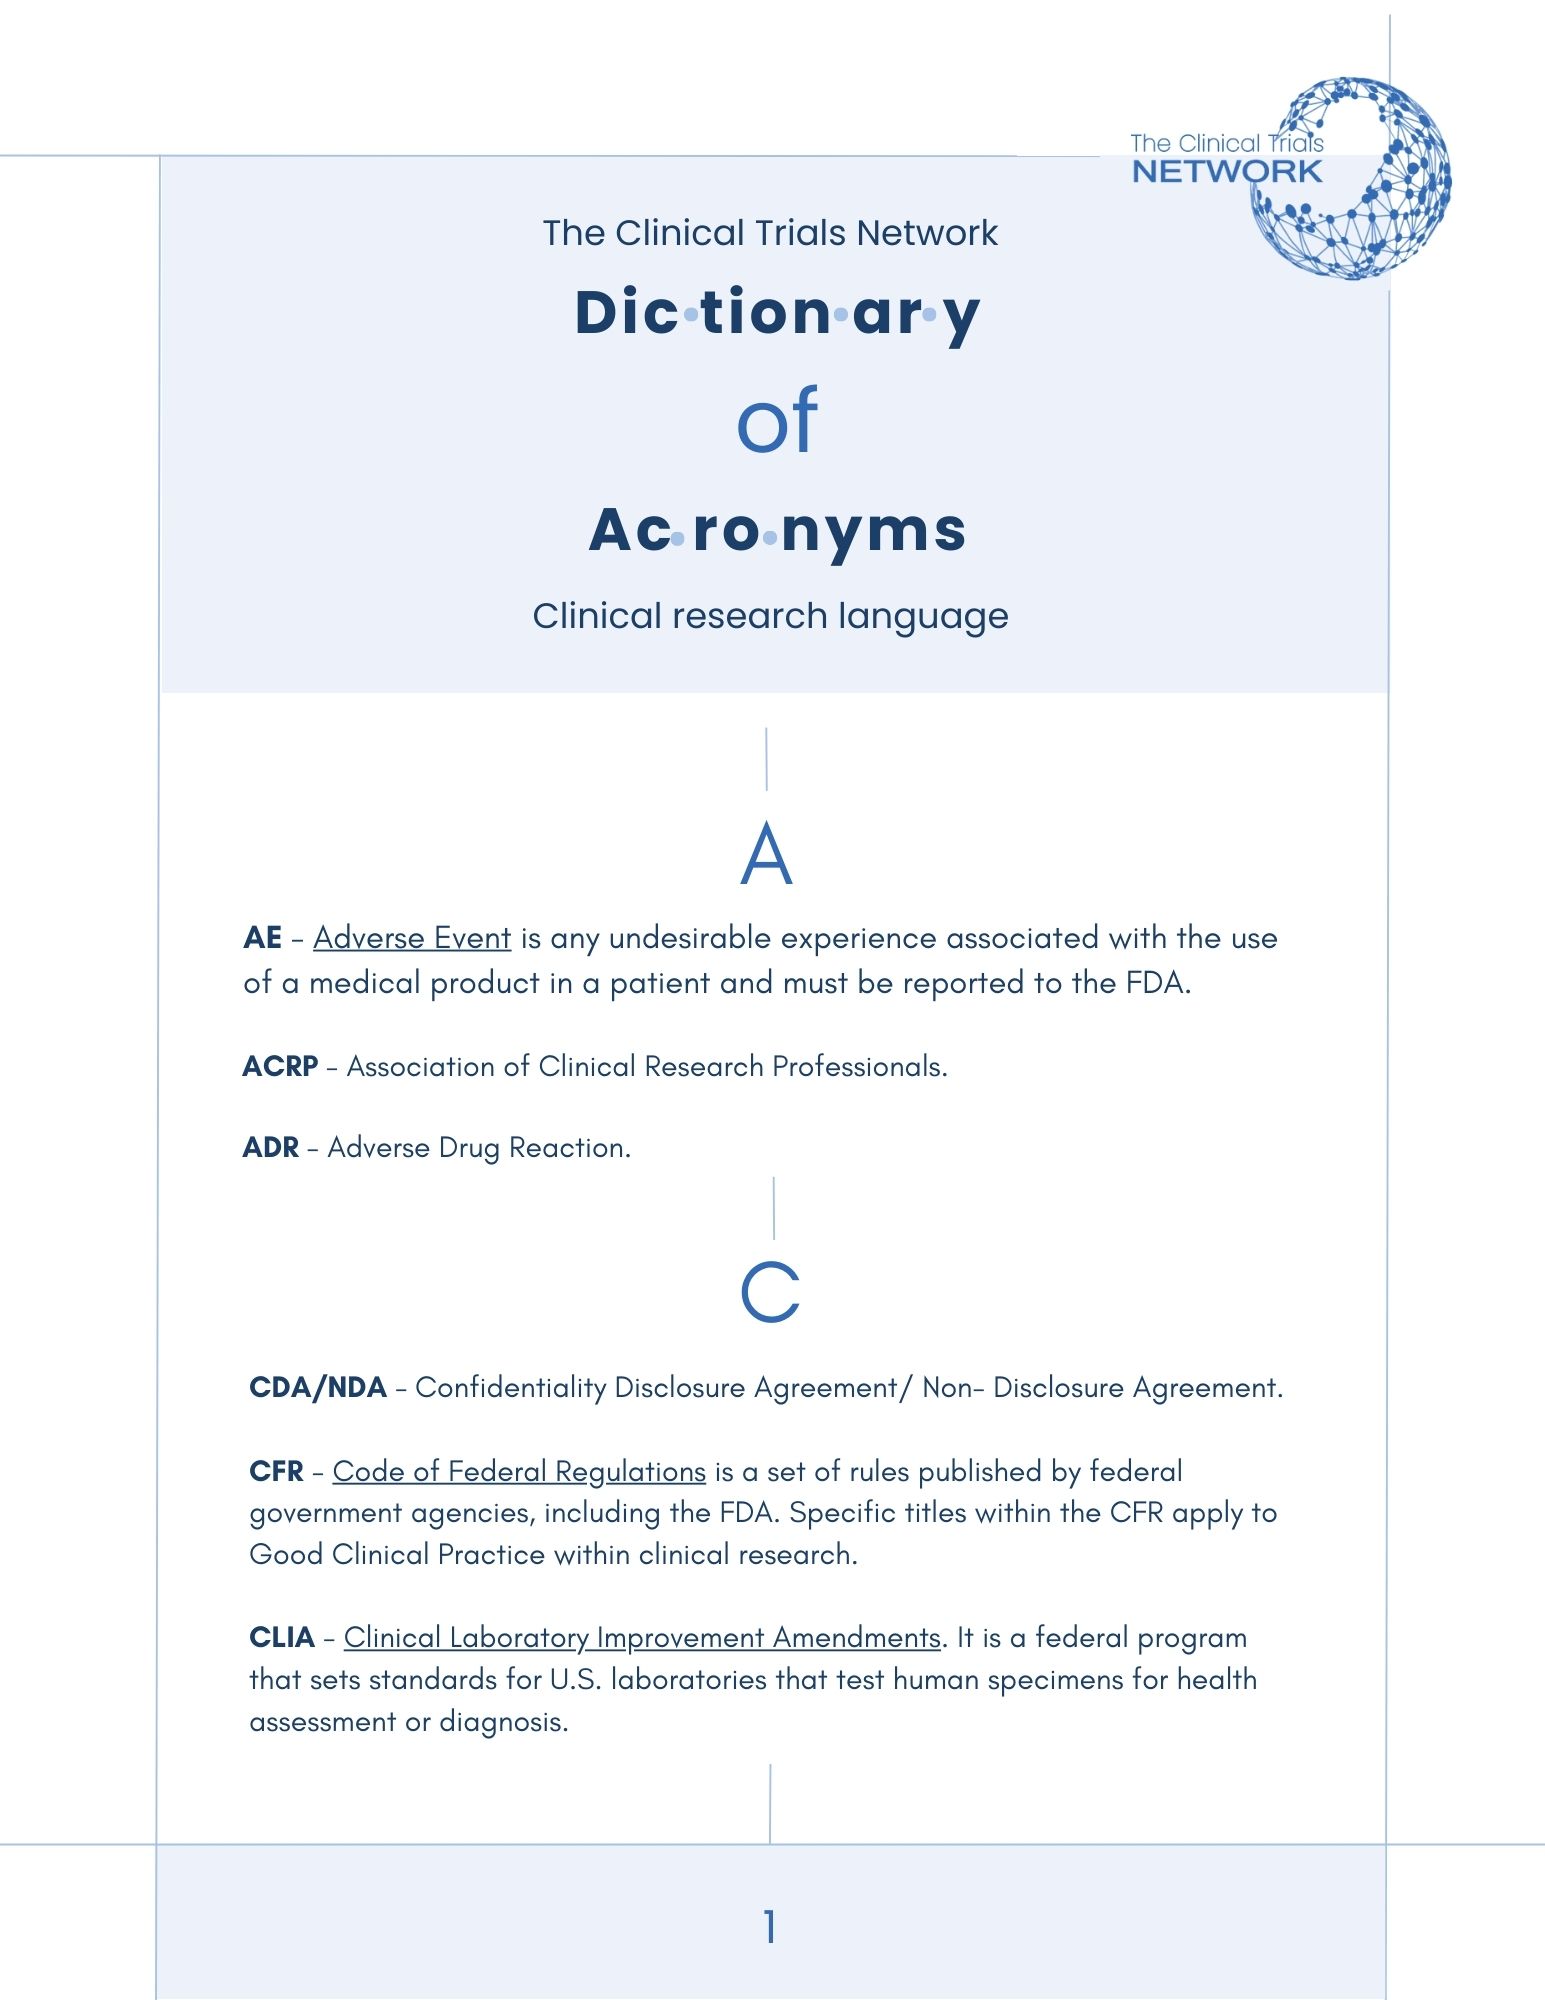 The CTNx Dictionary of Acronyms pg. 1